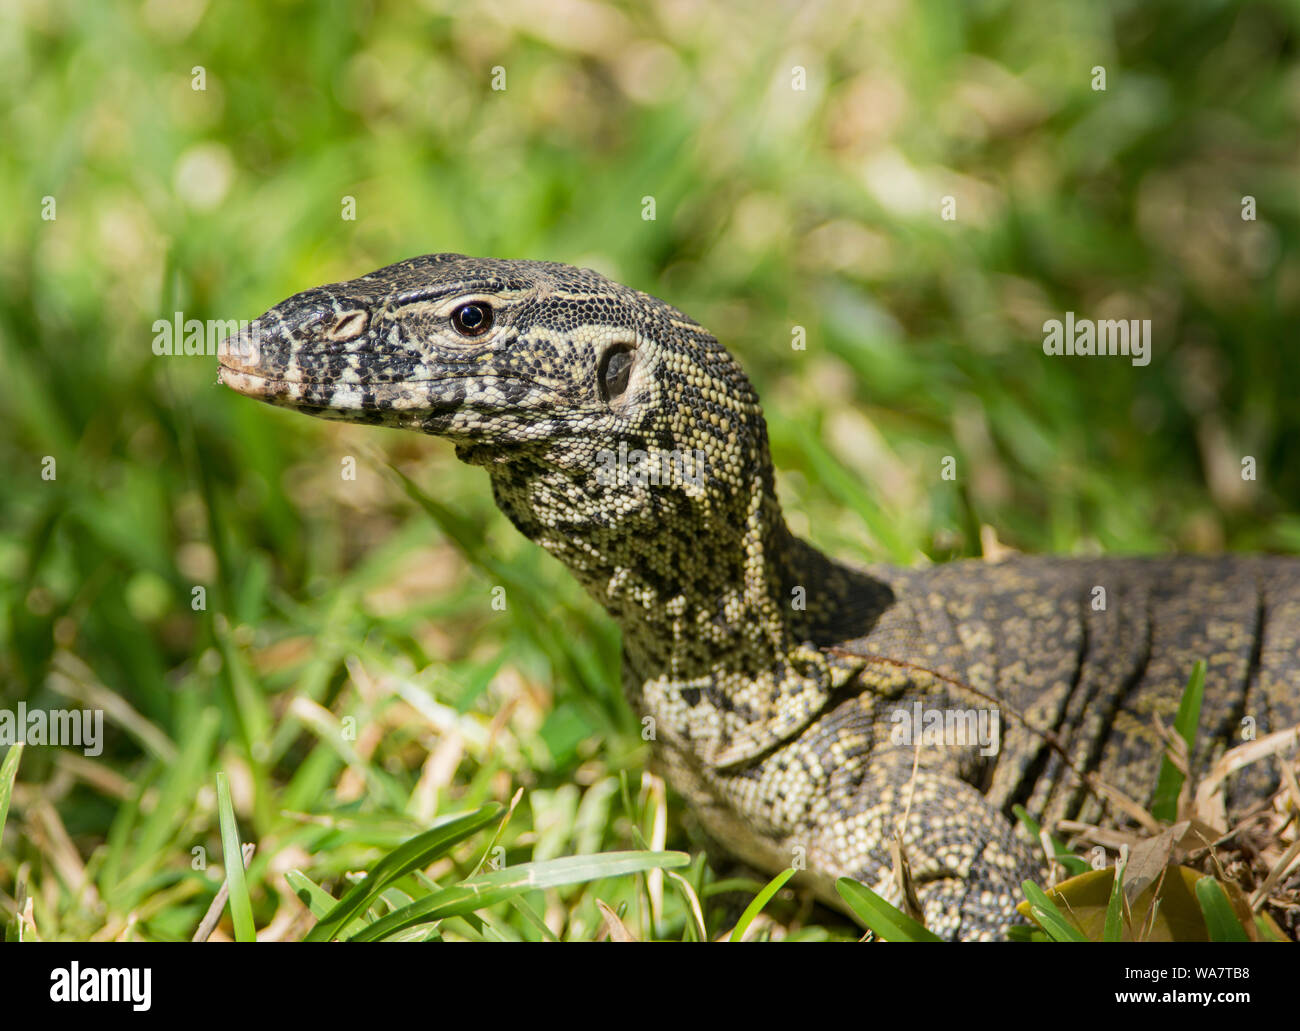 Close up of a Nile Monitor Lizard Varanus niloticus in the sun in The Gambia West Africa Stock Photo